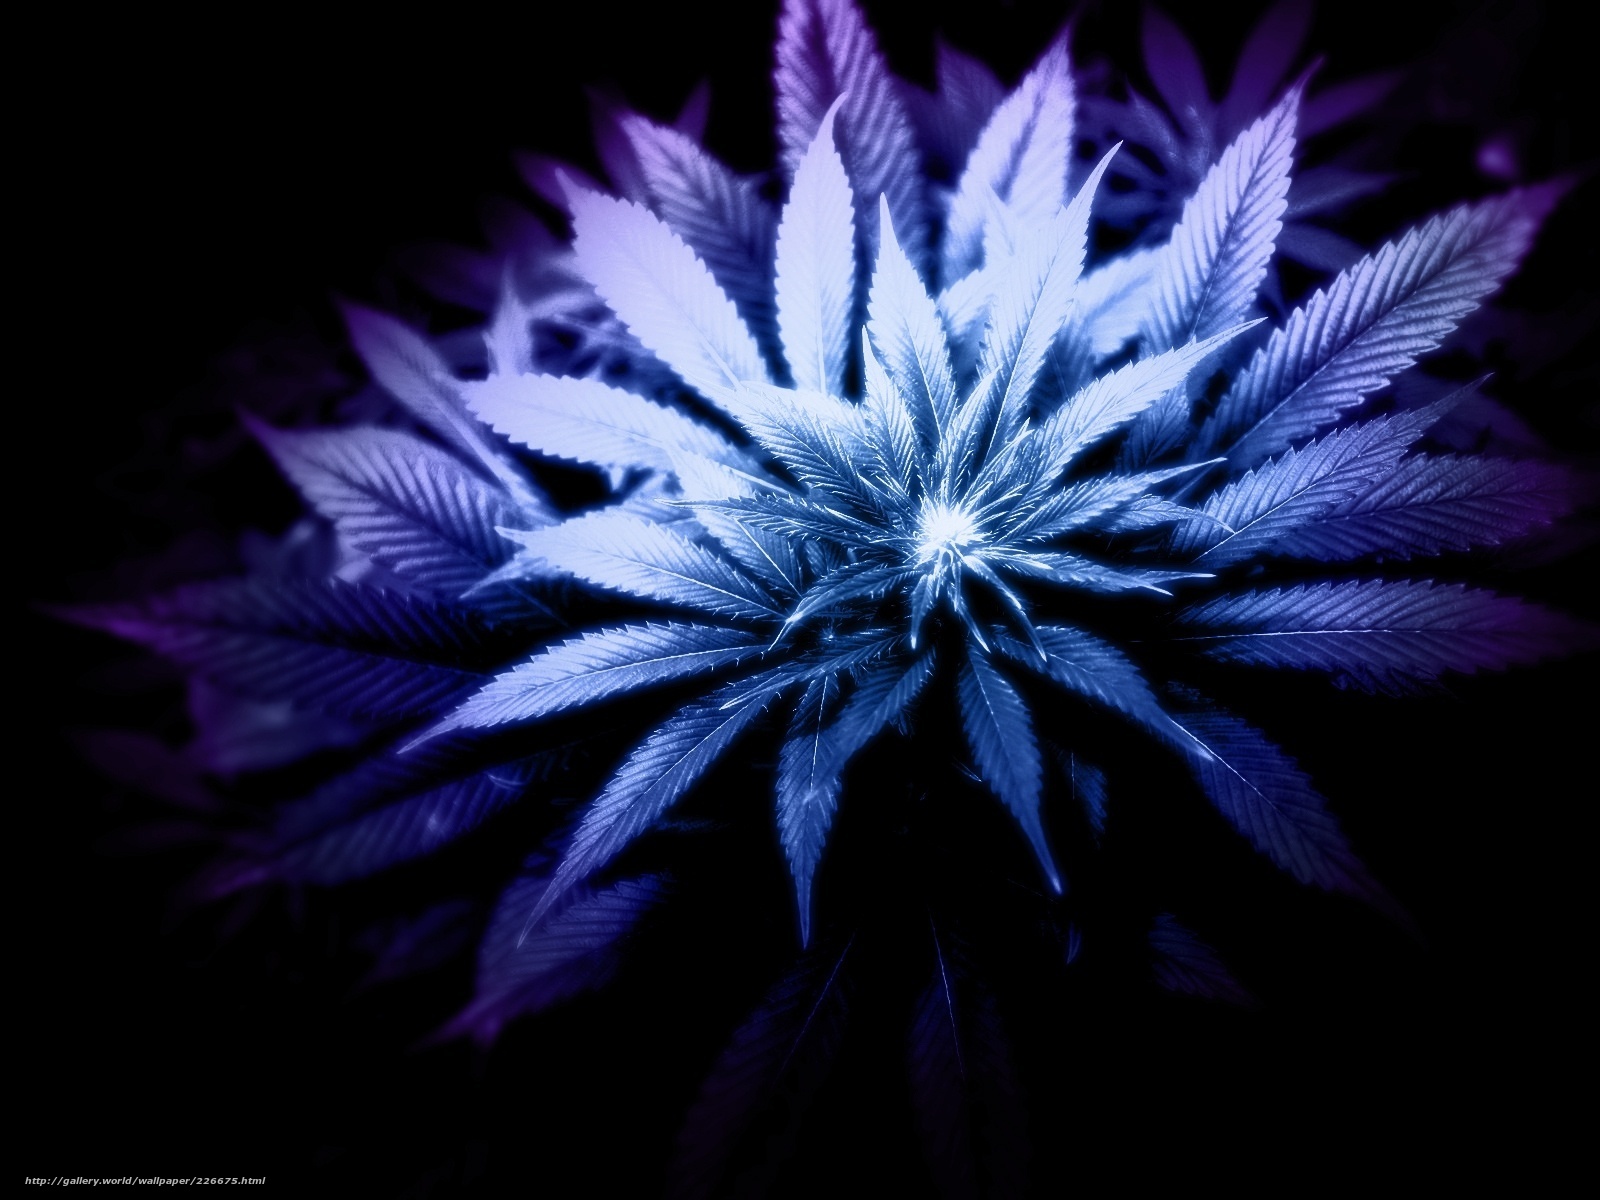 A blue and purple image of a plant - Weed